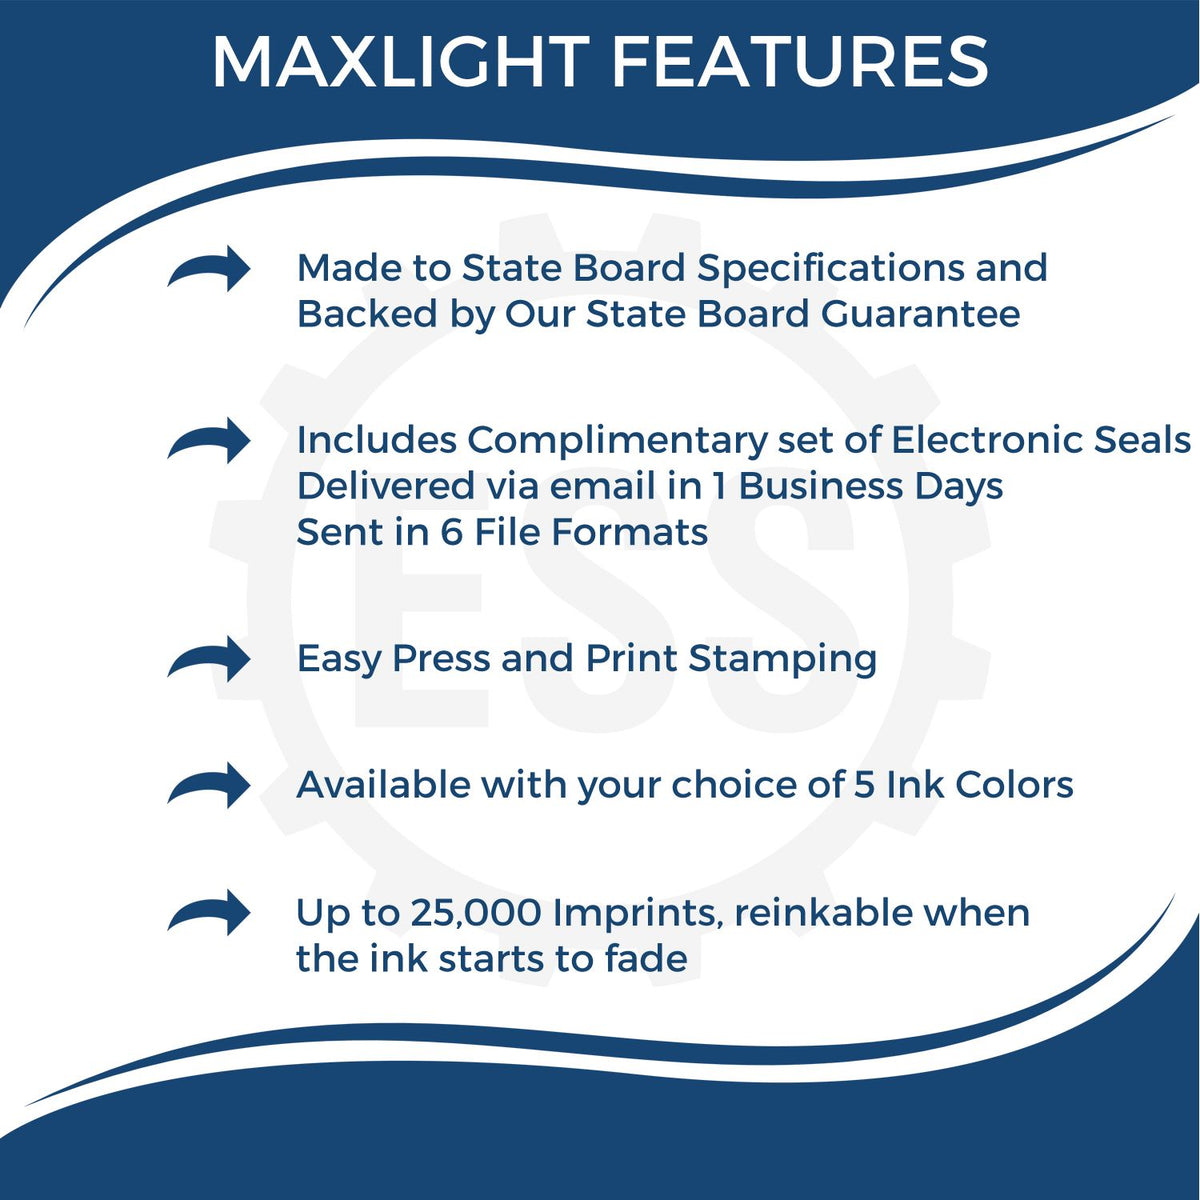 A picture of an infographic highlighting the selling points for the Premium MaxLight Pre-Inked Wyoming Landscape Architectural Stamp